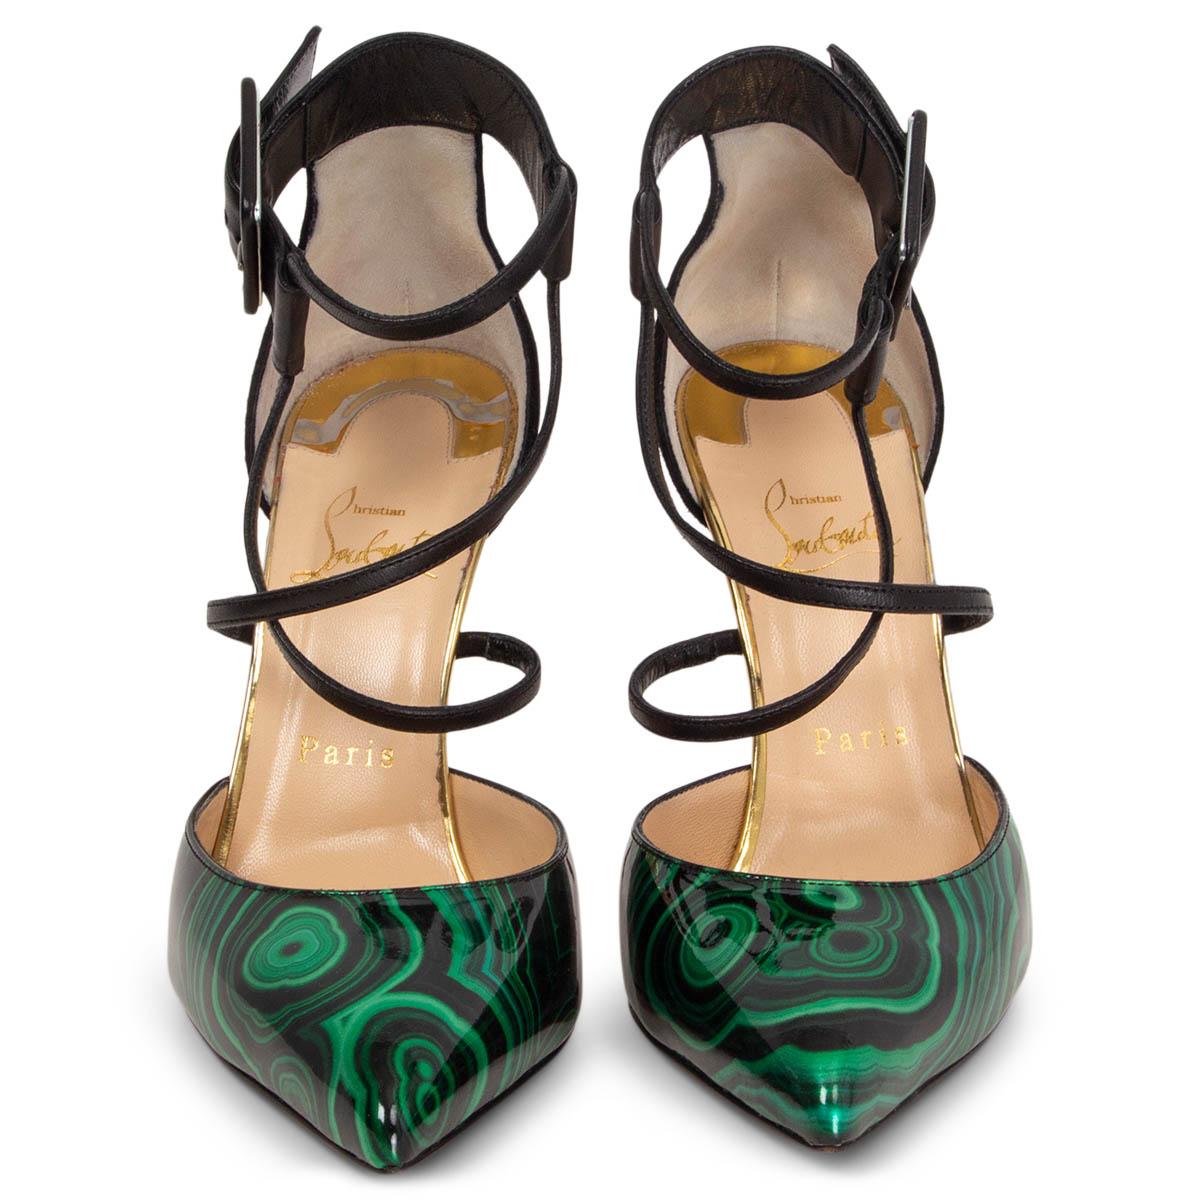 100% authentic Christian Louboutin Suzanna 100 pointed-toe pumps in malachite green swirl patent leather, black calfskin ankle-strap and black suede heel. Have been worn one inside and are in virtually new condition. 

Measurements
Imprinted